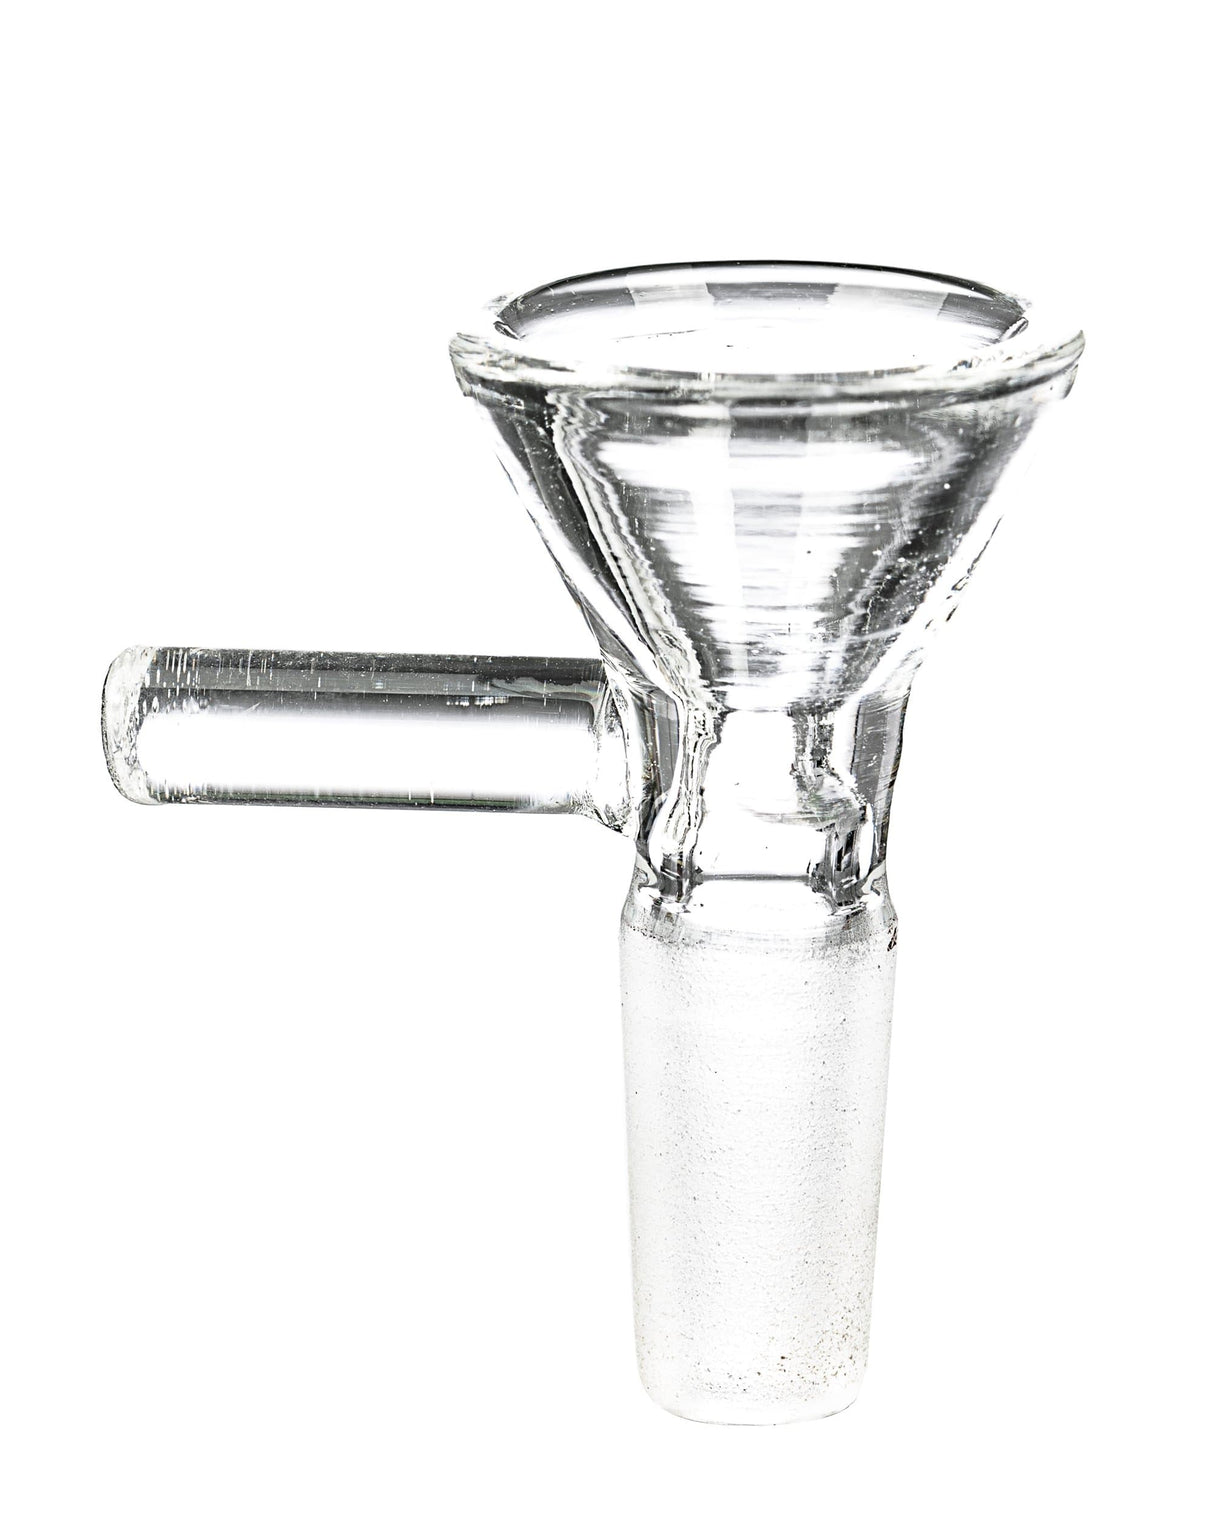 The Valiant Funnel Bowl 10mm - Clear Glass Male Joint for Bongs - Front View